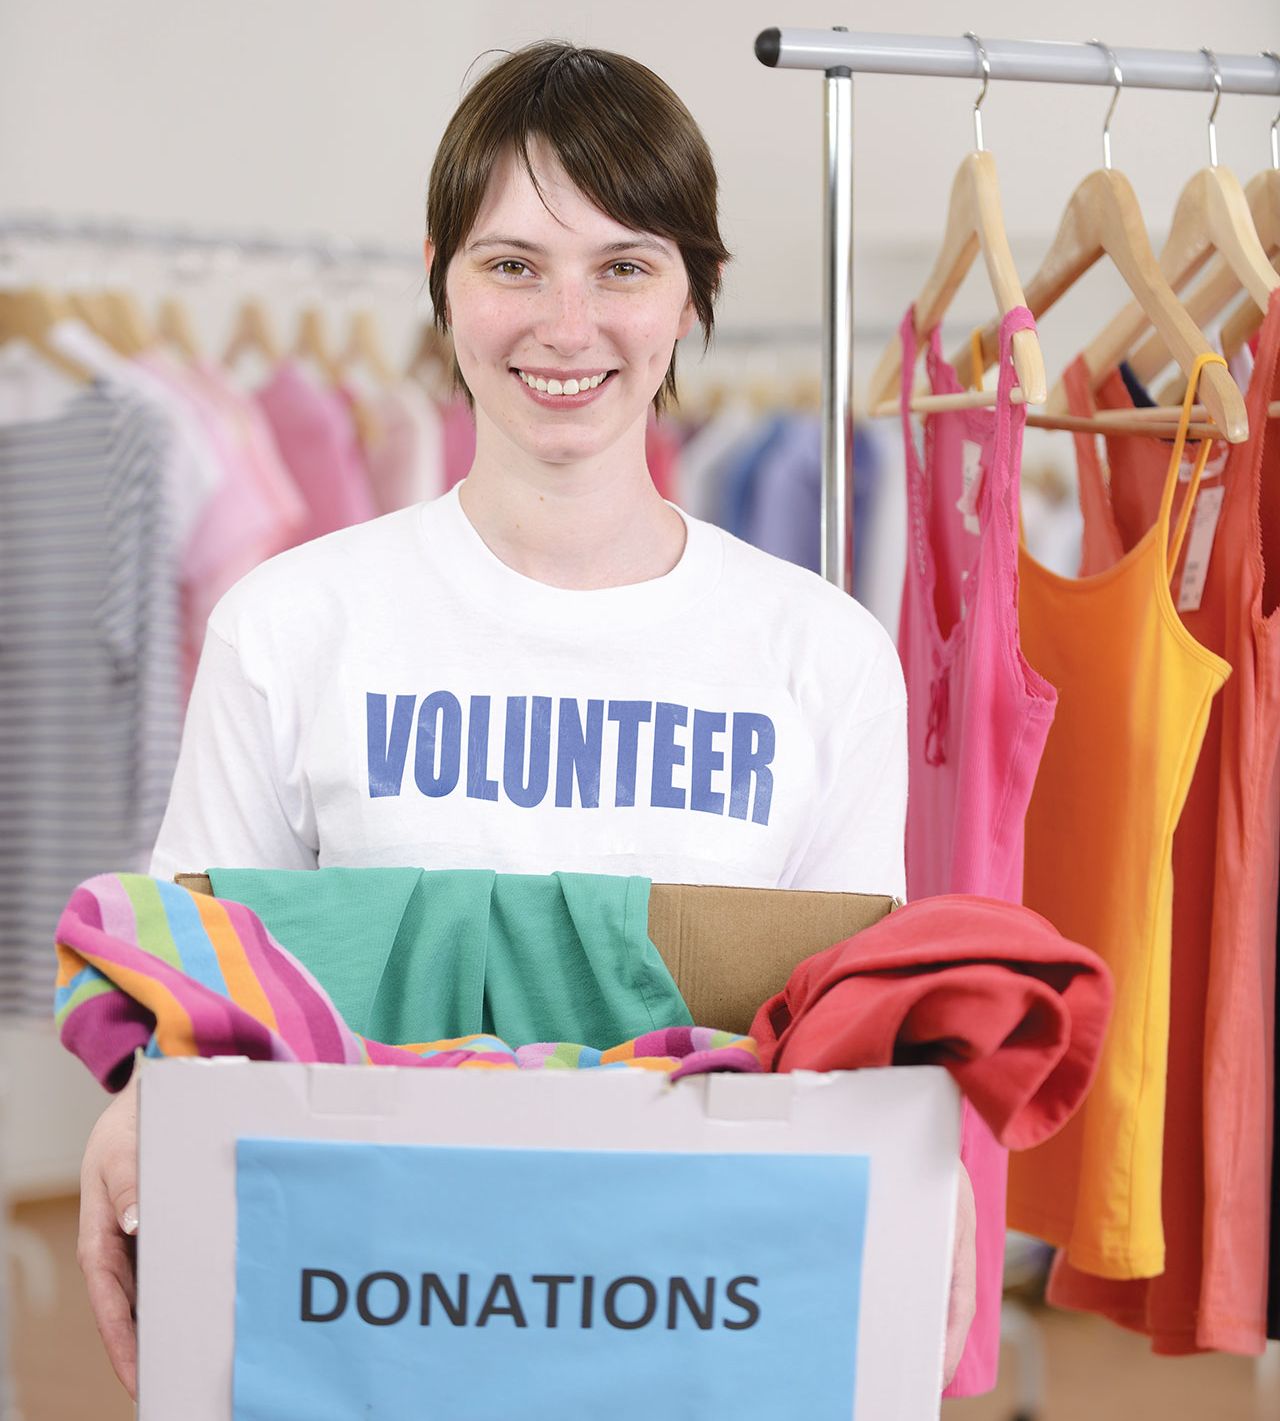 Volunteer with clothes donation box